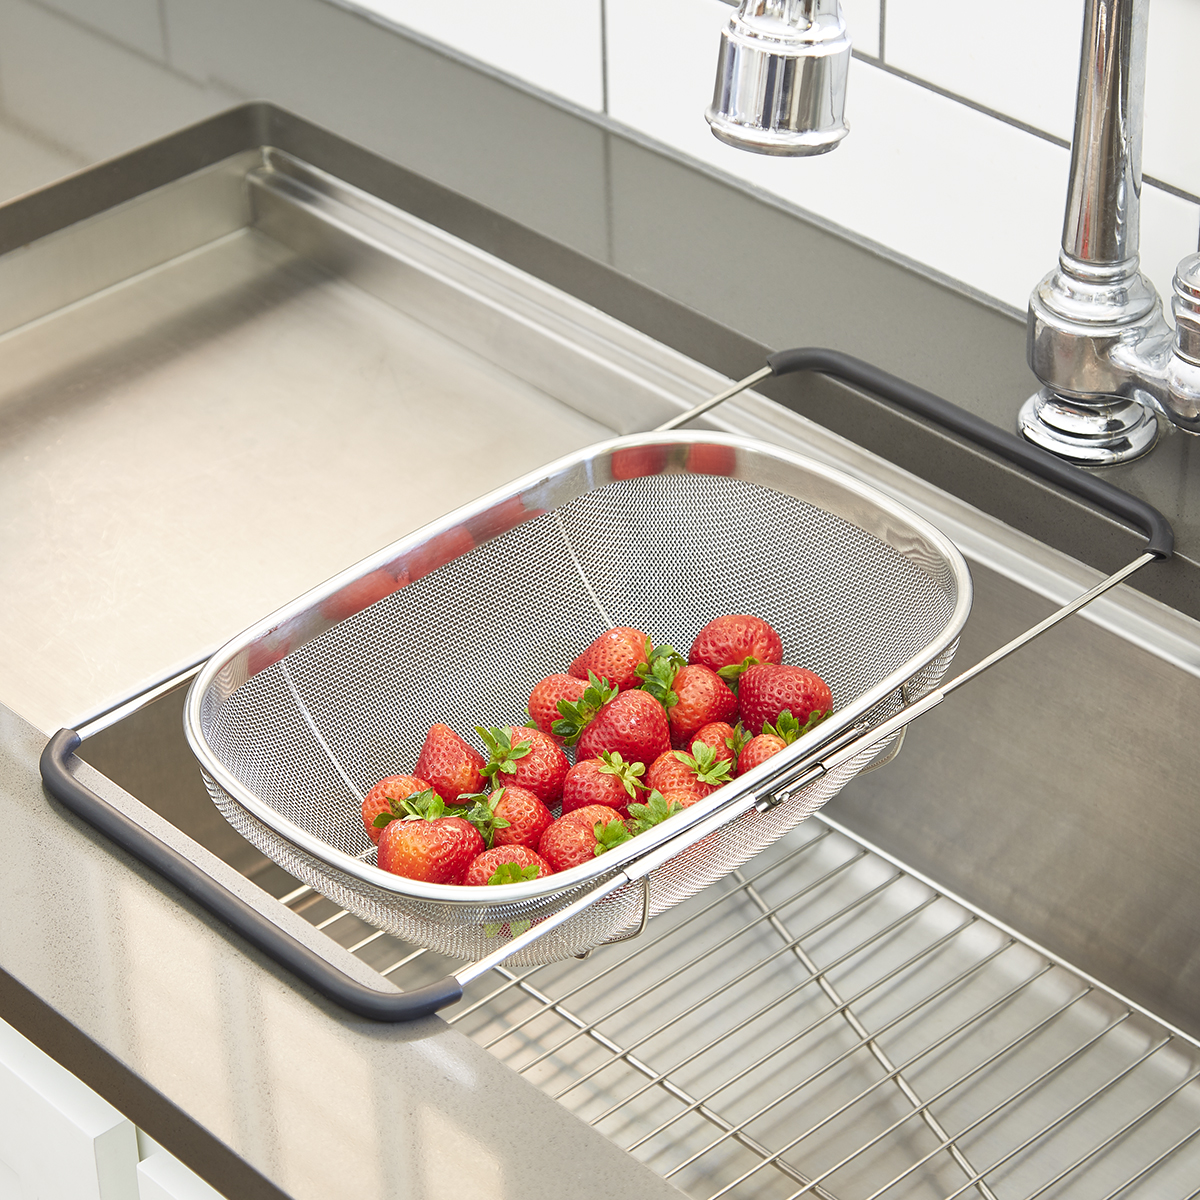 Polder Stainless Steel Mesh Sink Basket | The Container Store